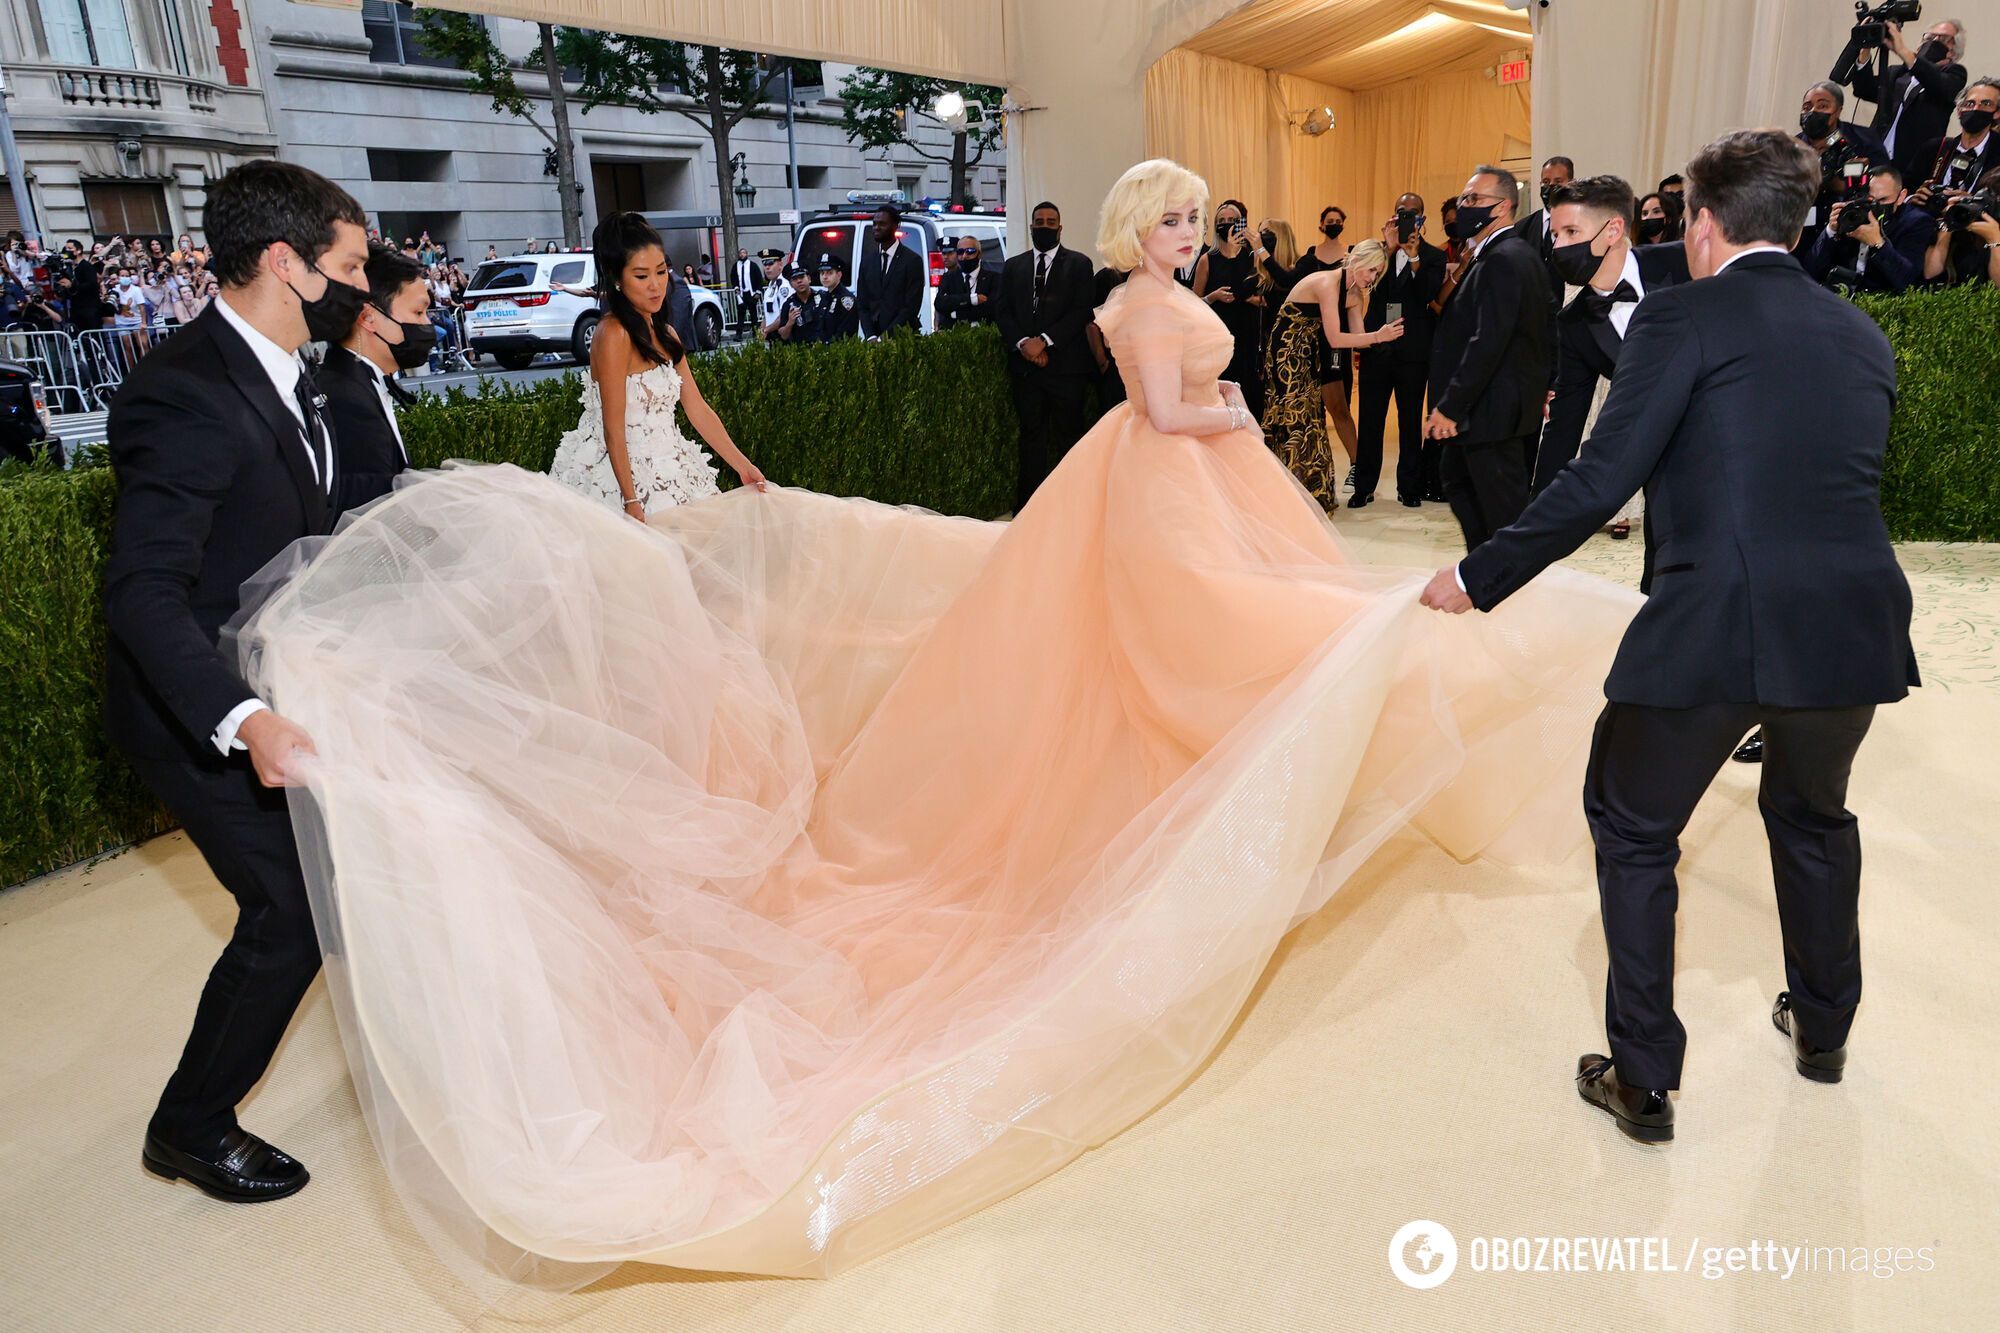 Tickets for the price of an apartment in Kyiv and a complete ban on social networks: what is the Met Gala and why is there so much hype around it